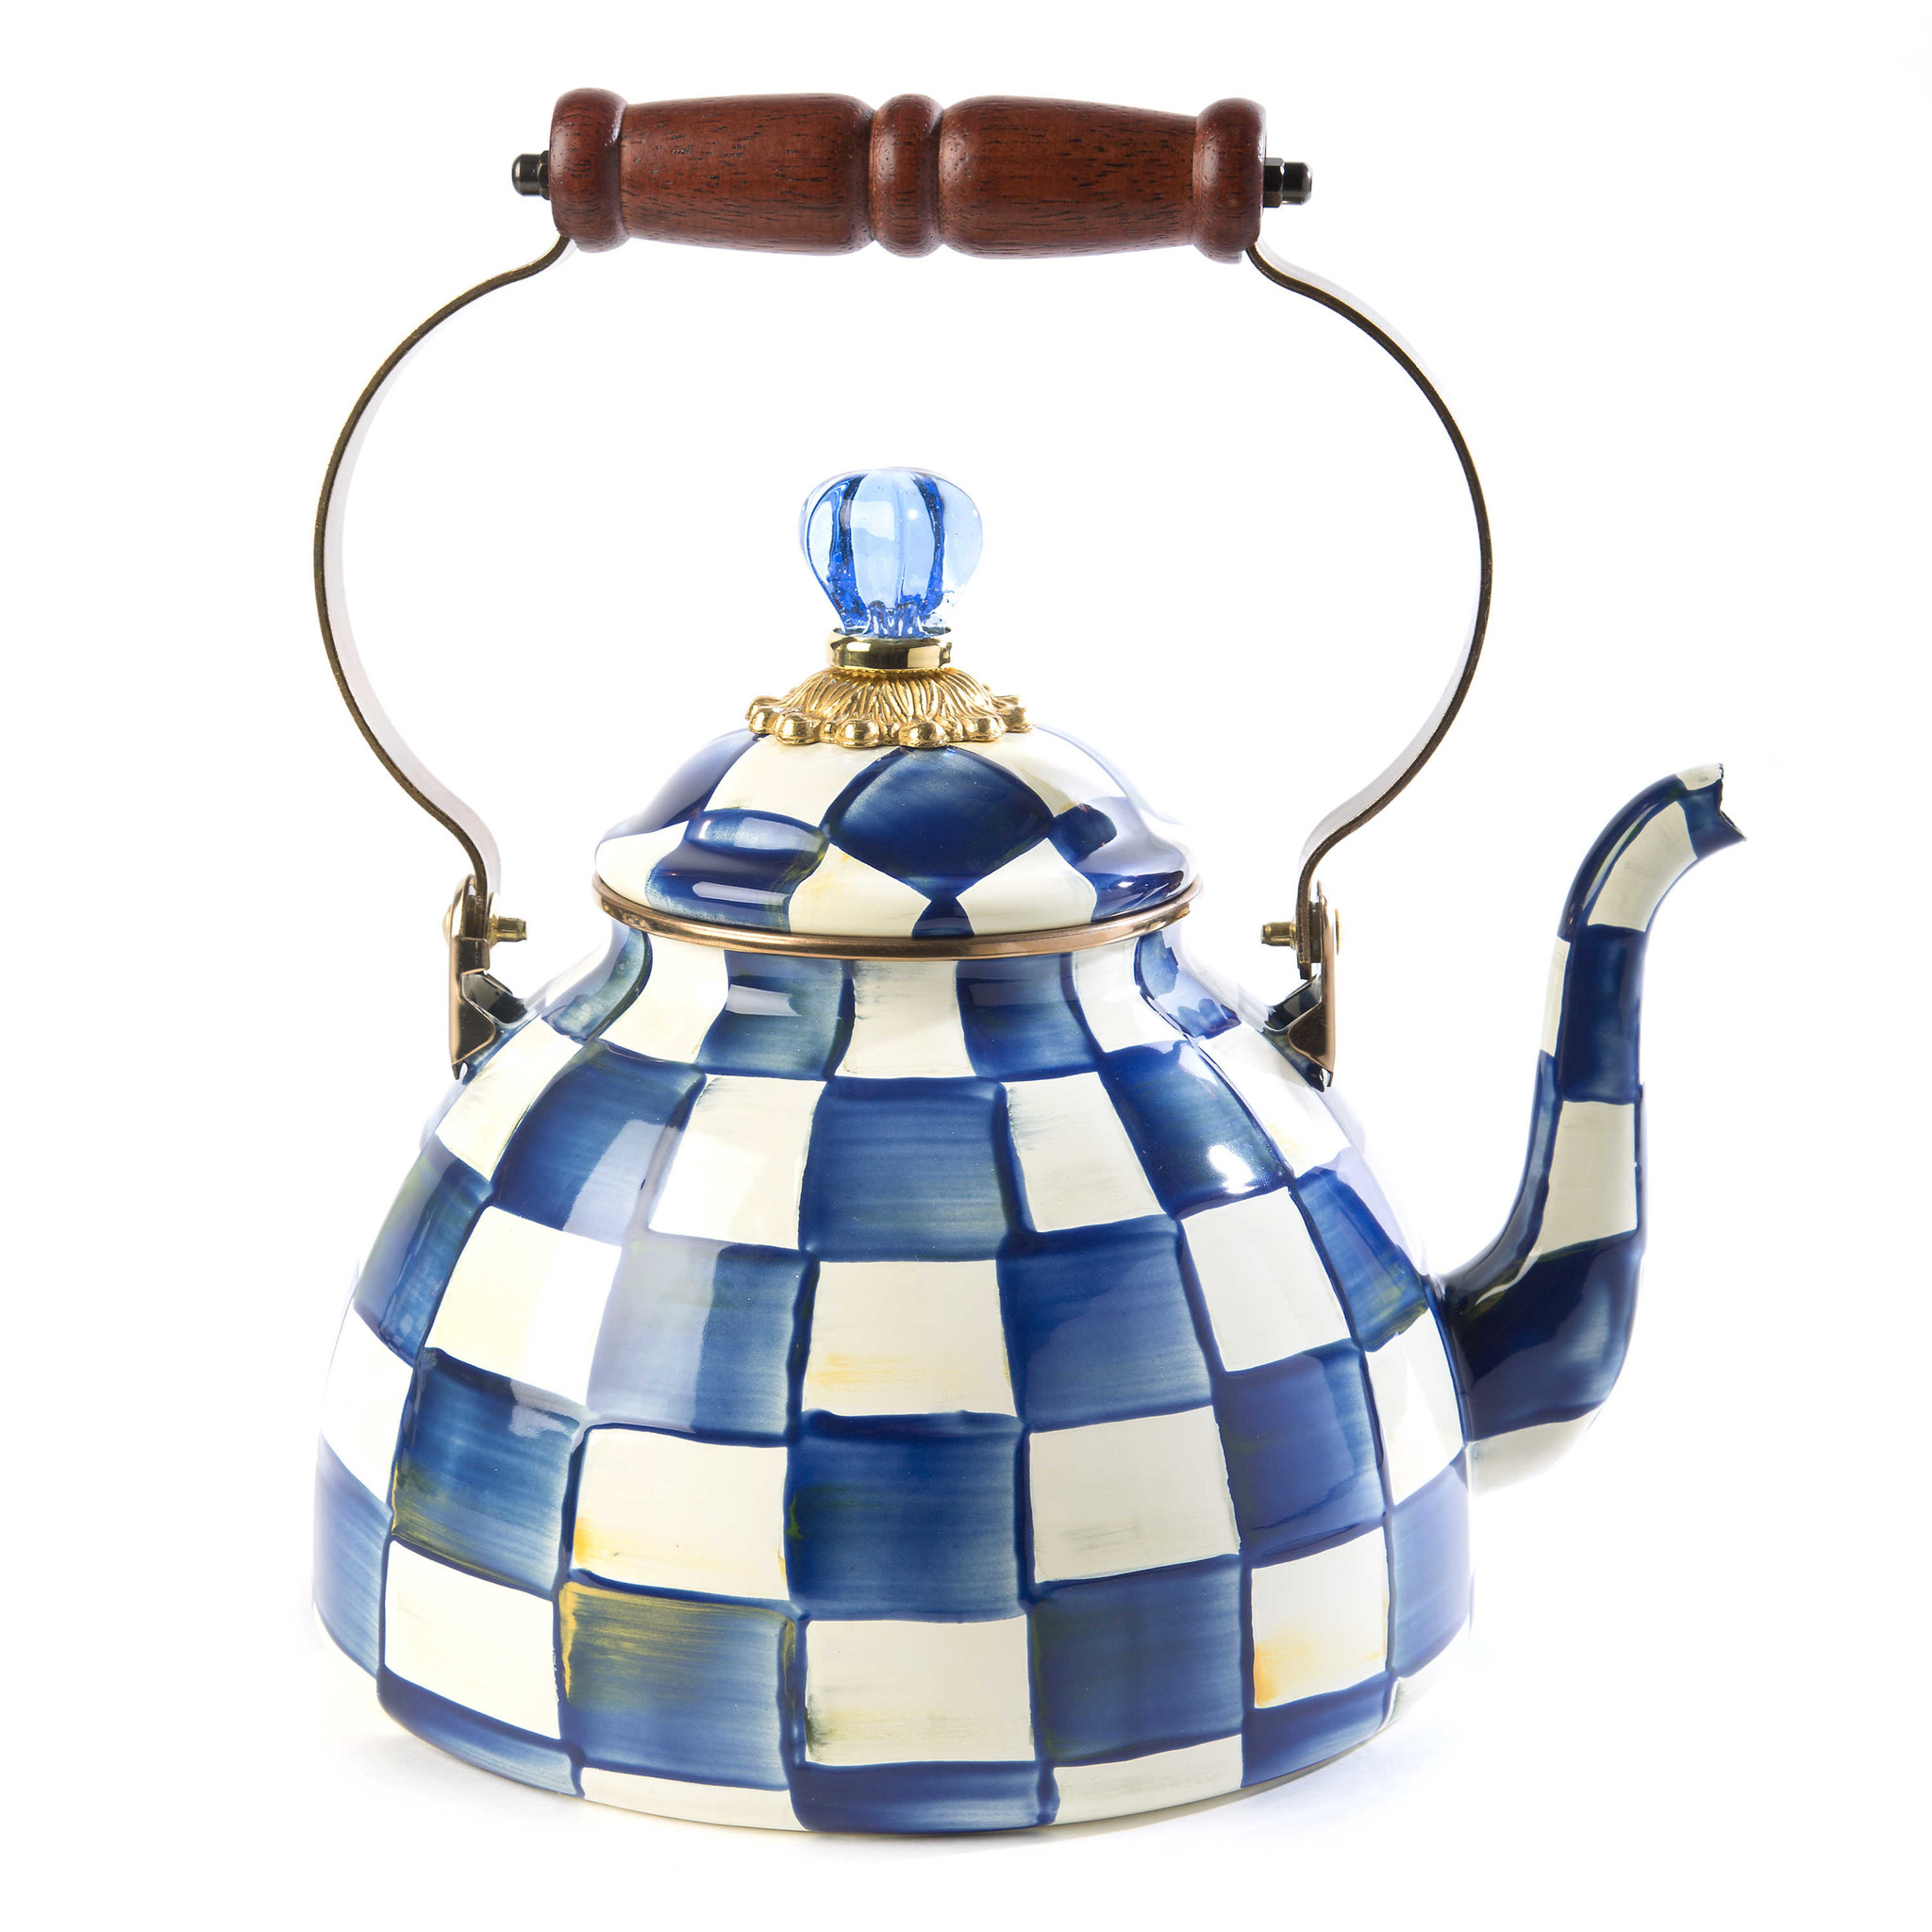 Everything you should know about the tea kettle